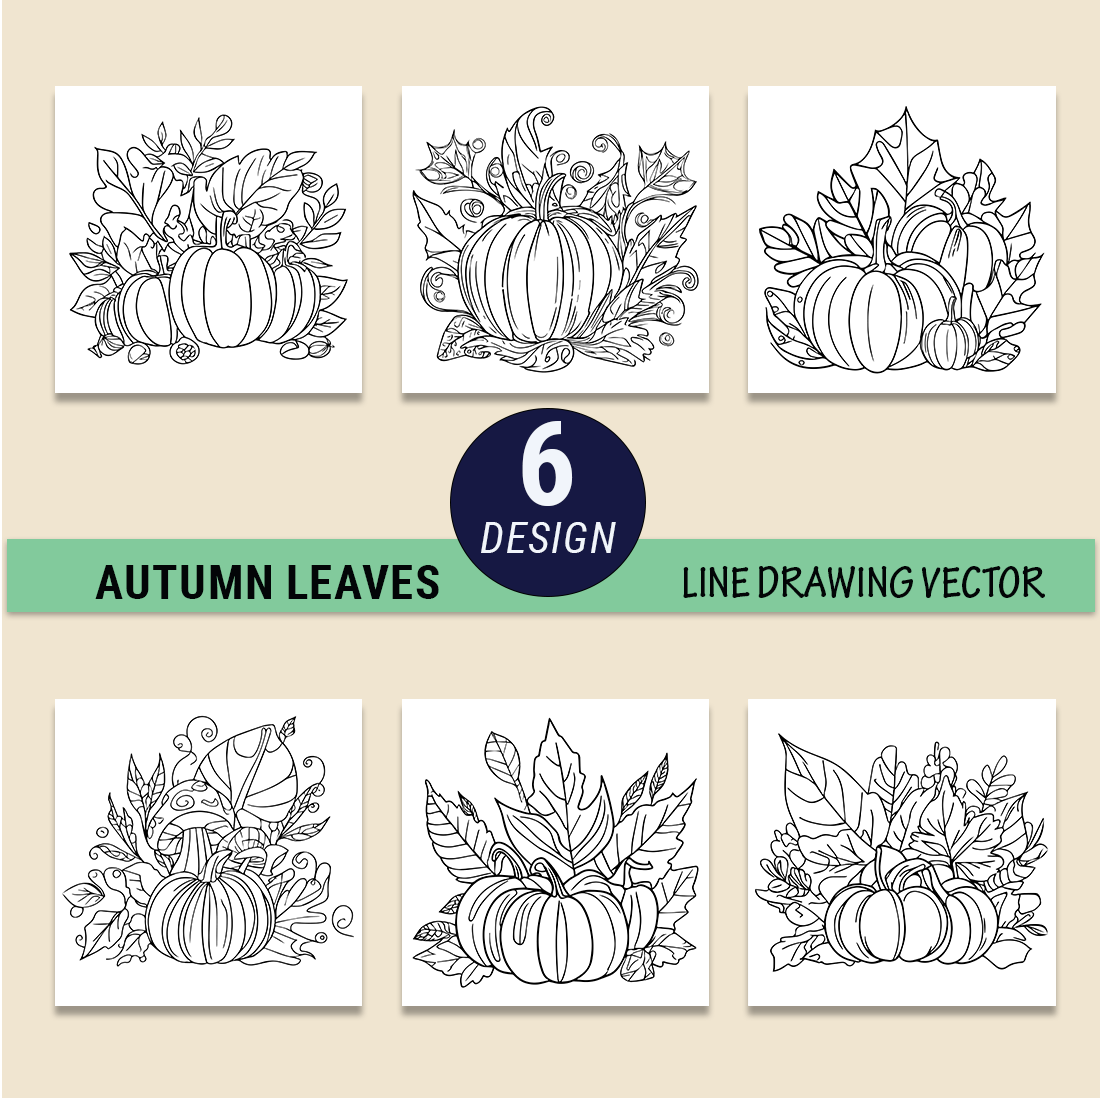 Nature Thanksgiving coloring sheet, free printable coloring pages, hand drawing autumn coloring shee cover image.